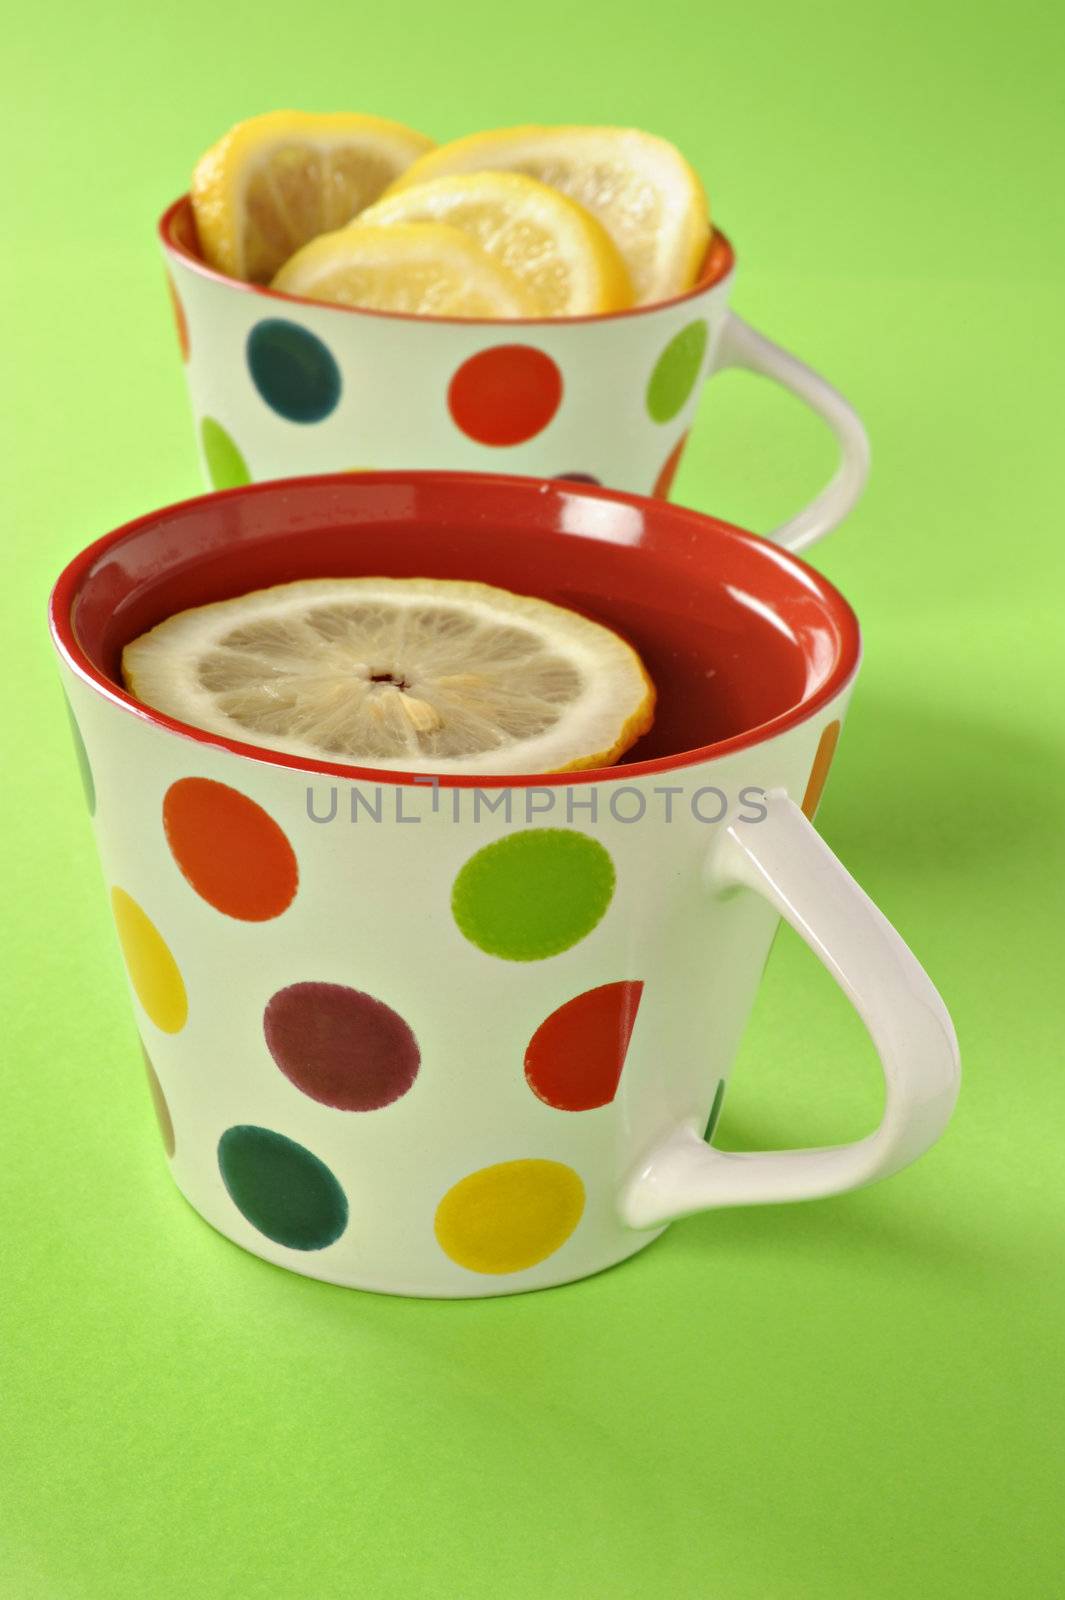 Tea with lemon in polka dot cups by tish1